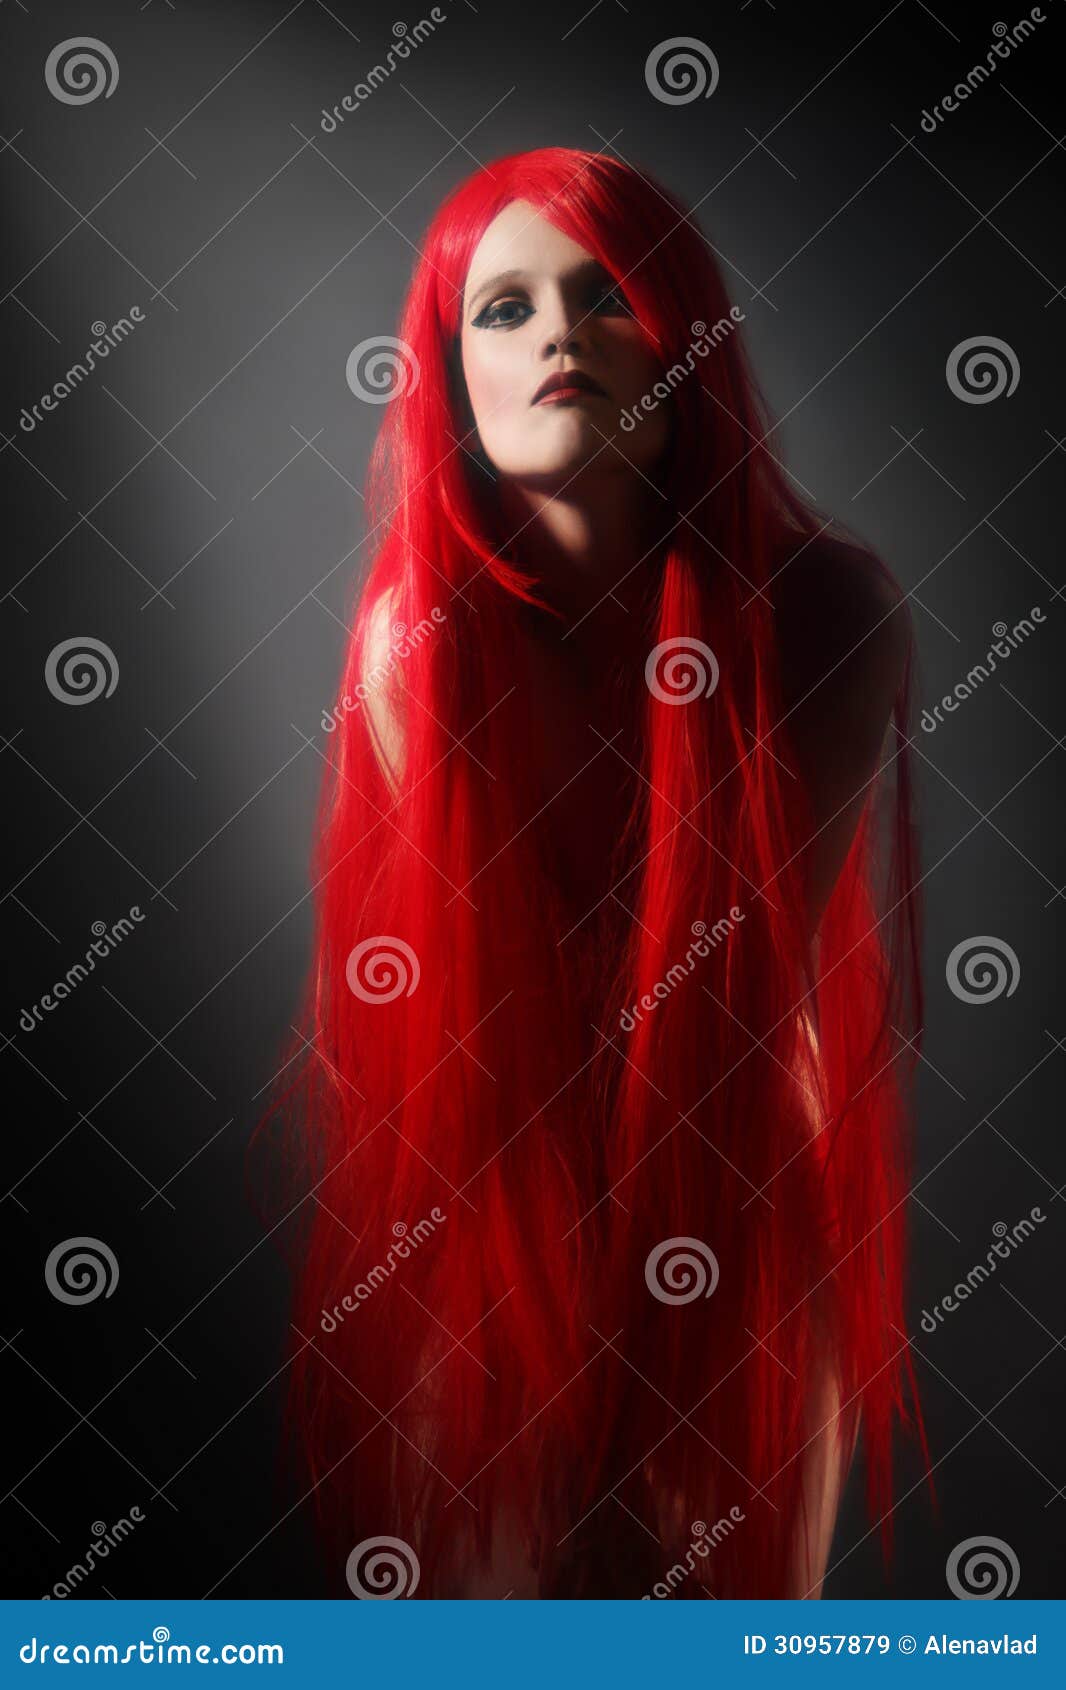 Red hair woman hairstyle stock image. Image of adult 